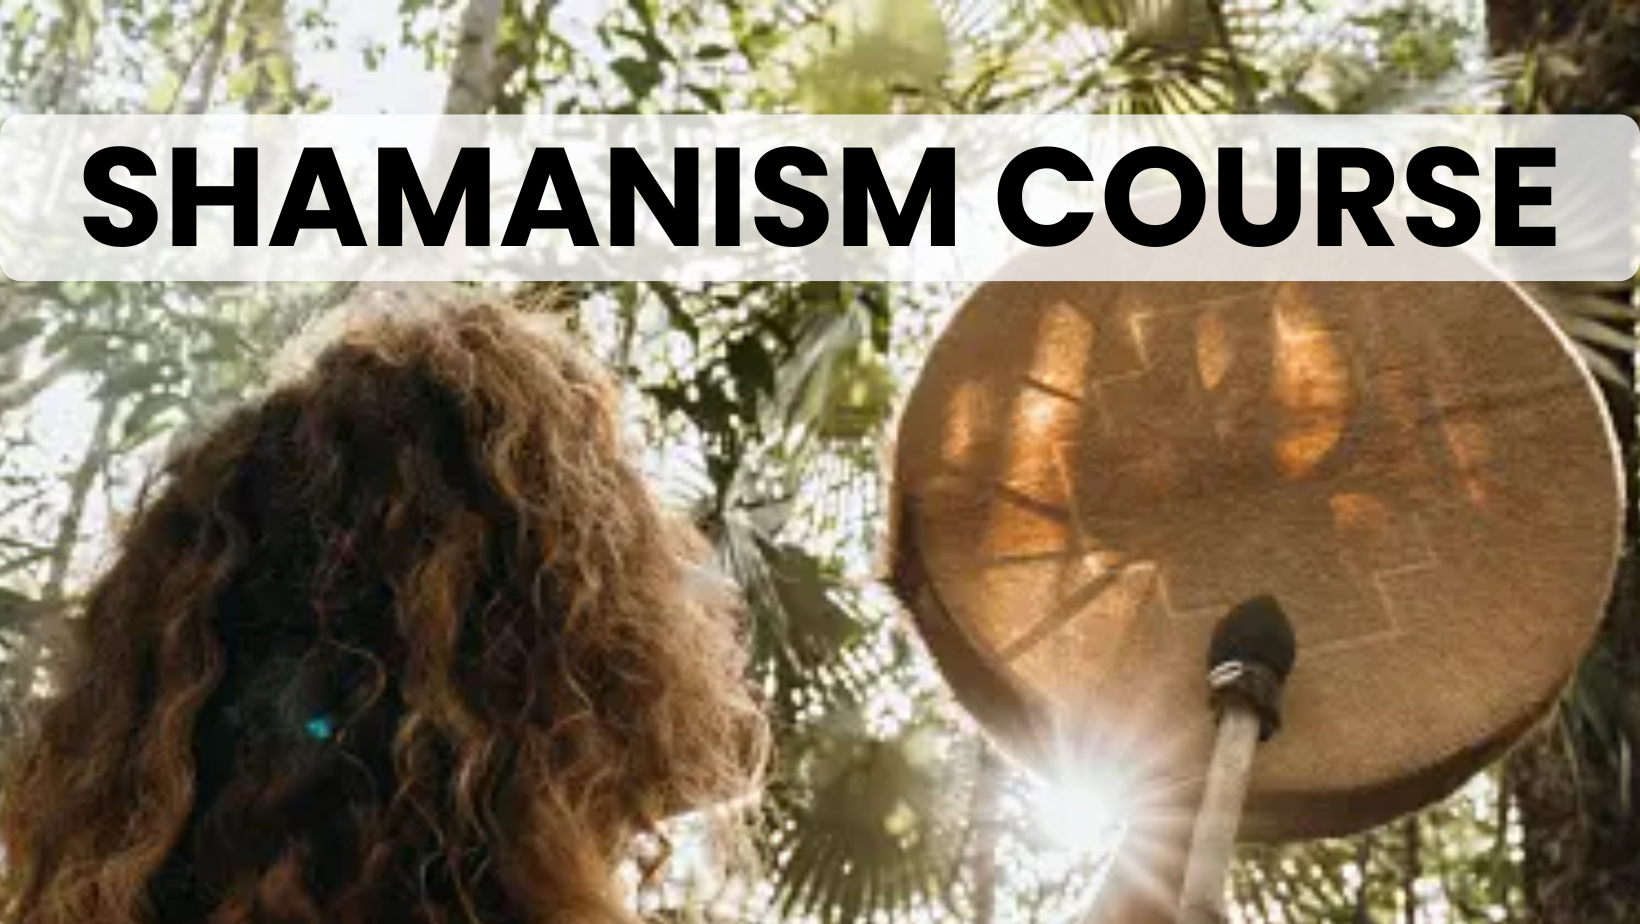 Shamanism Courses in Pune